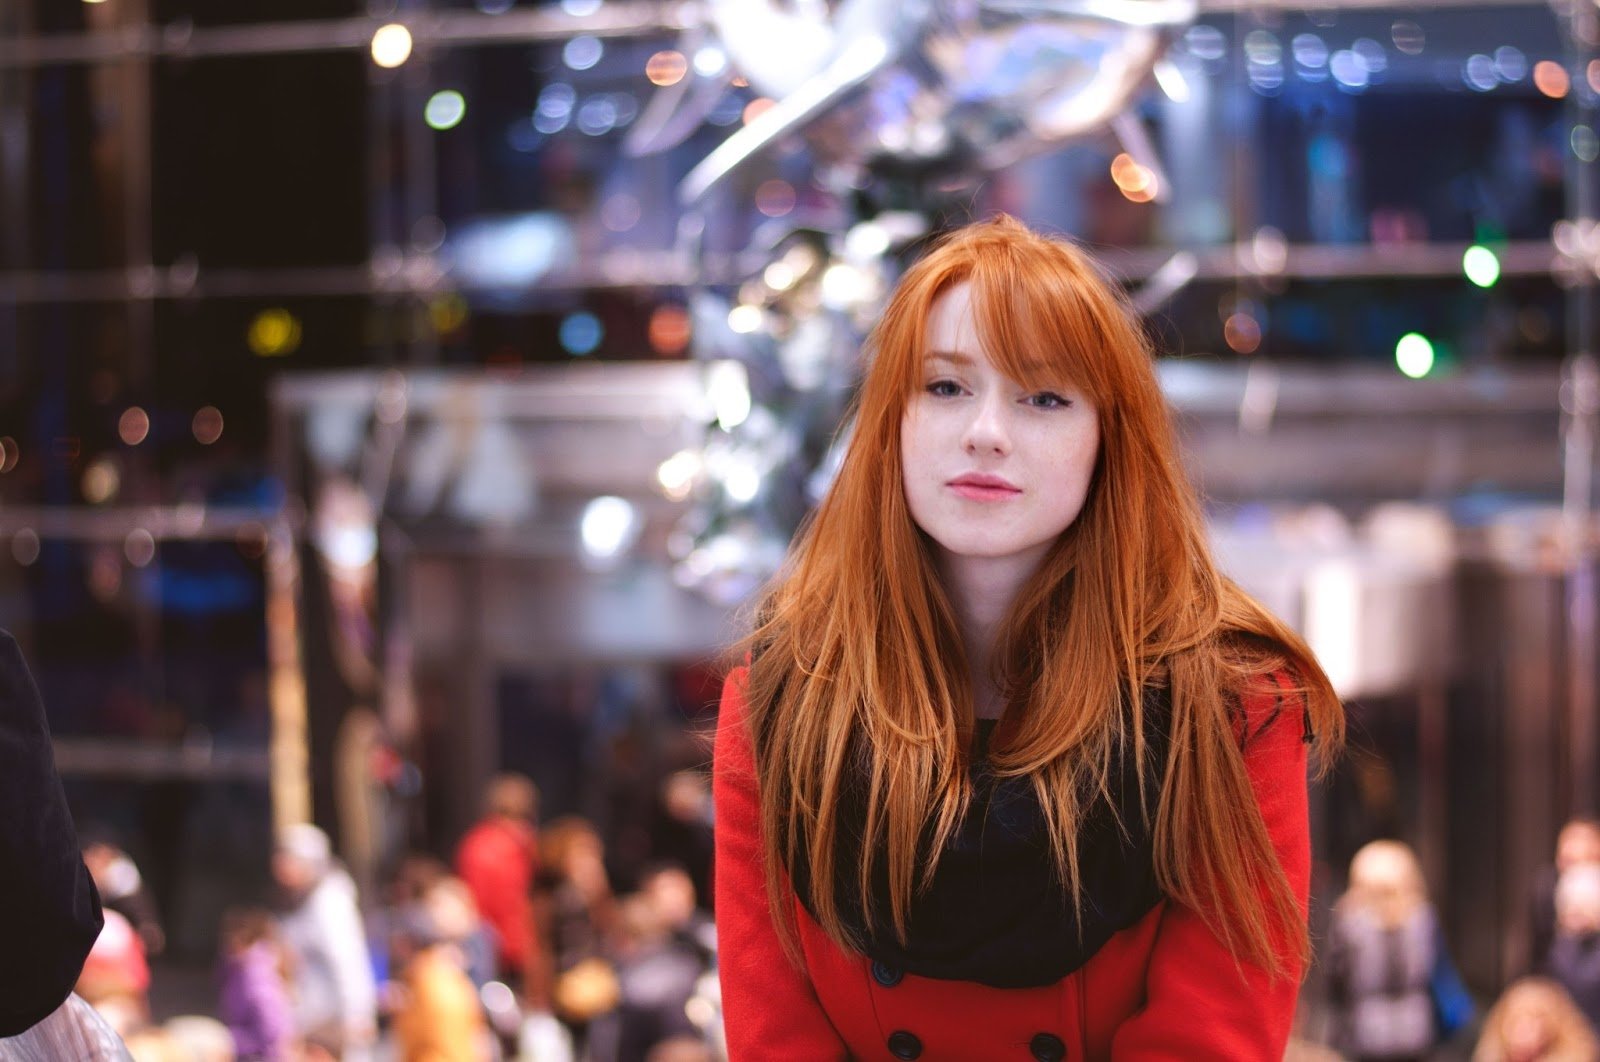 9 Alina Kovalenko Hd Wallpapers Background Images Wallpaper Abyss Images, Photos, Reviews